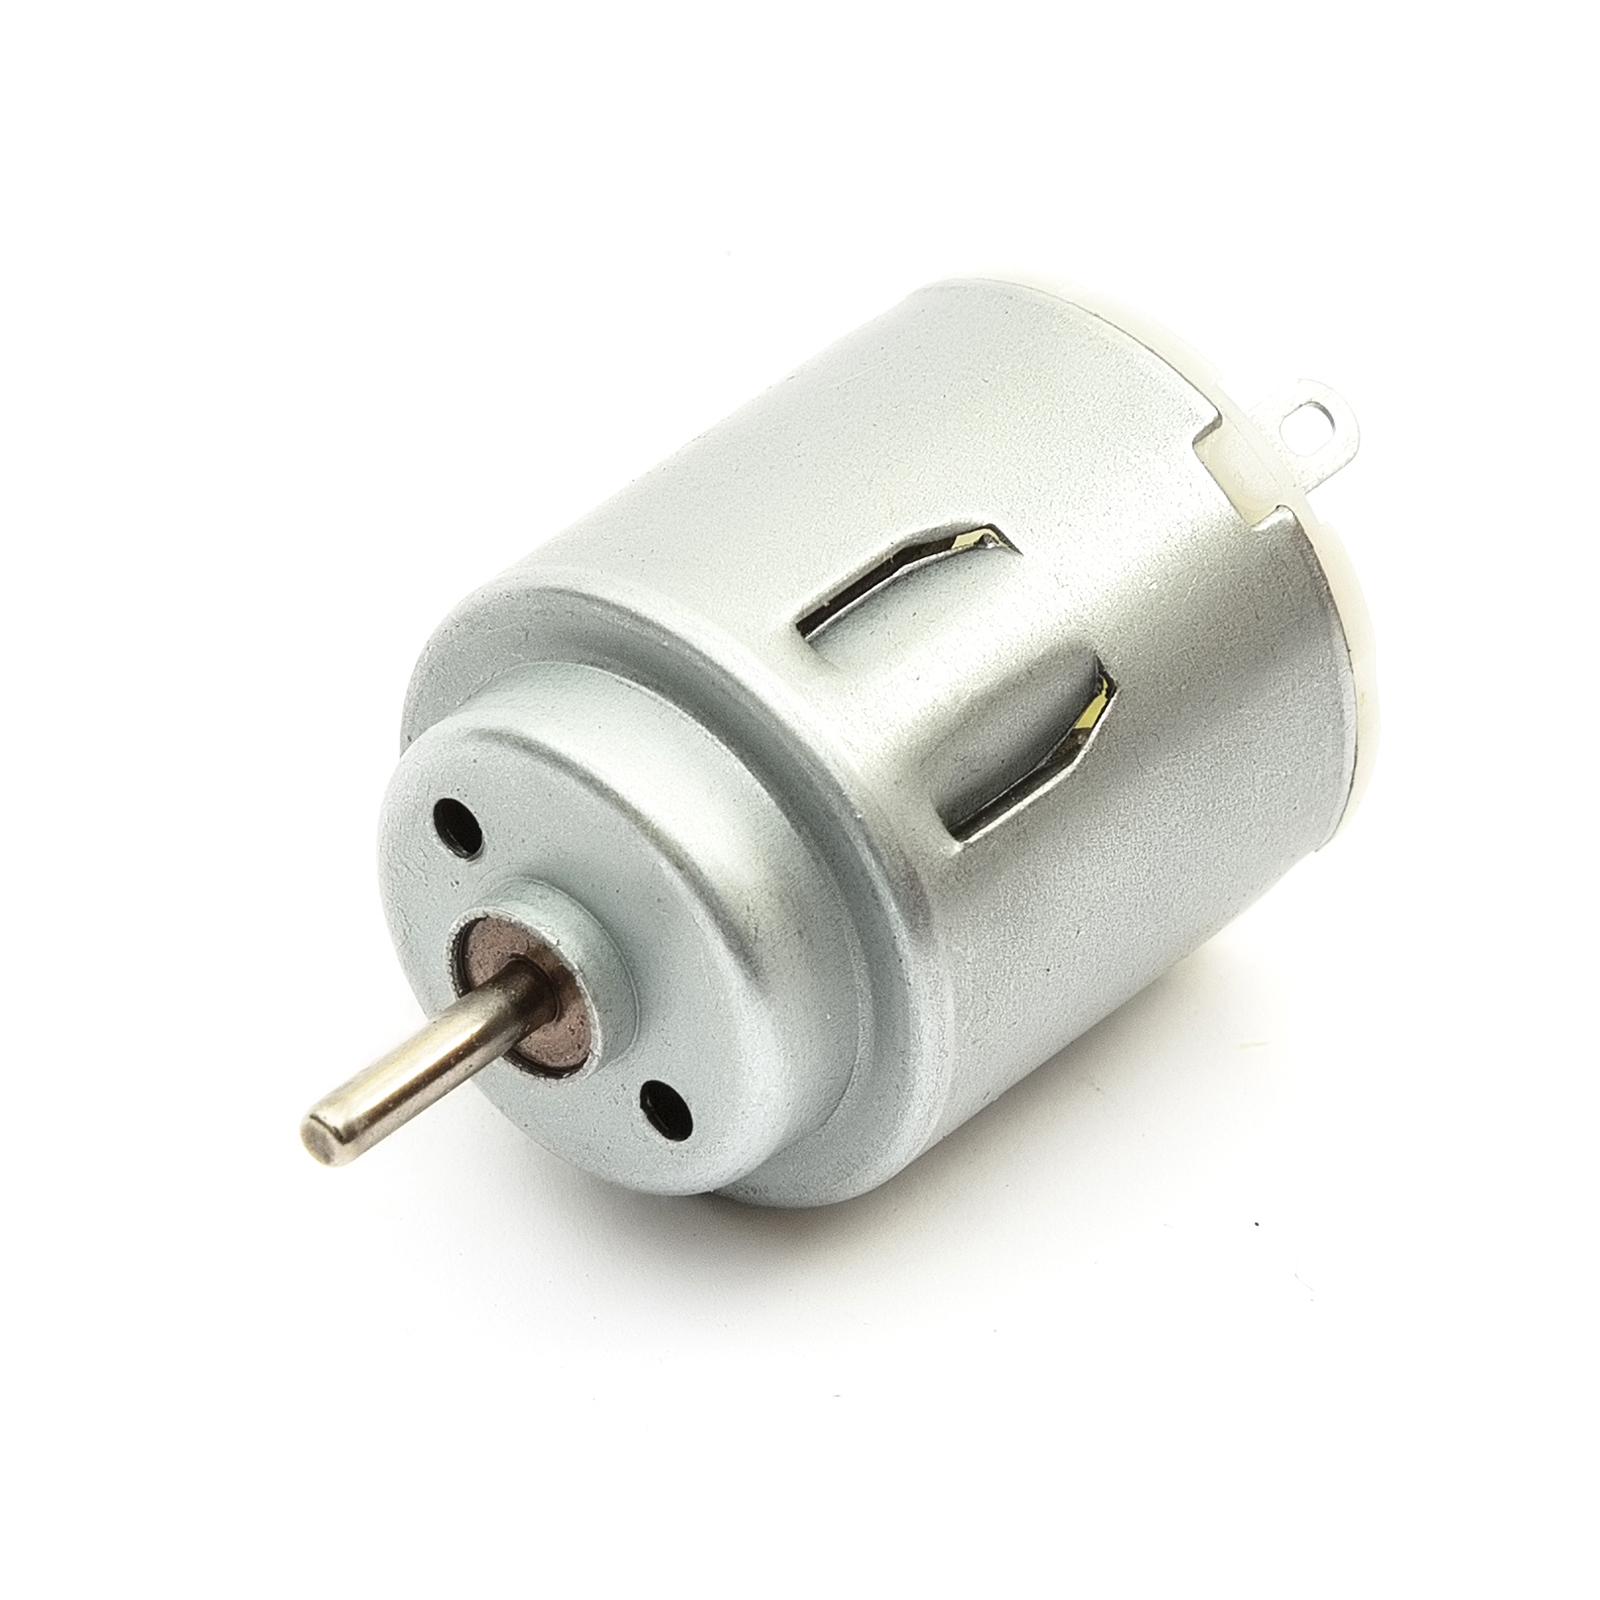 Mabuchi Round Type DC Hobby Craft RC Motor Re-140 new 1.95mm X 8mm Shaft for sale online 1x 